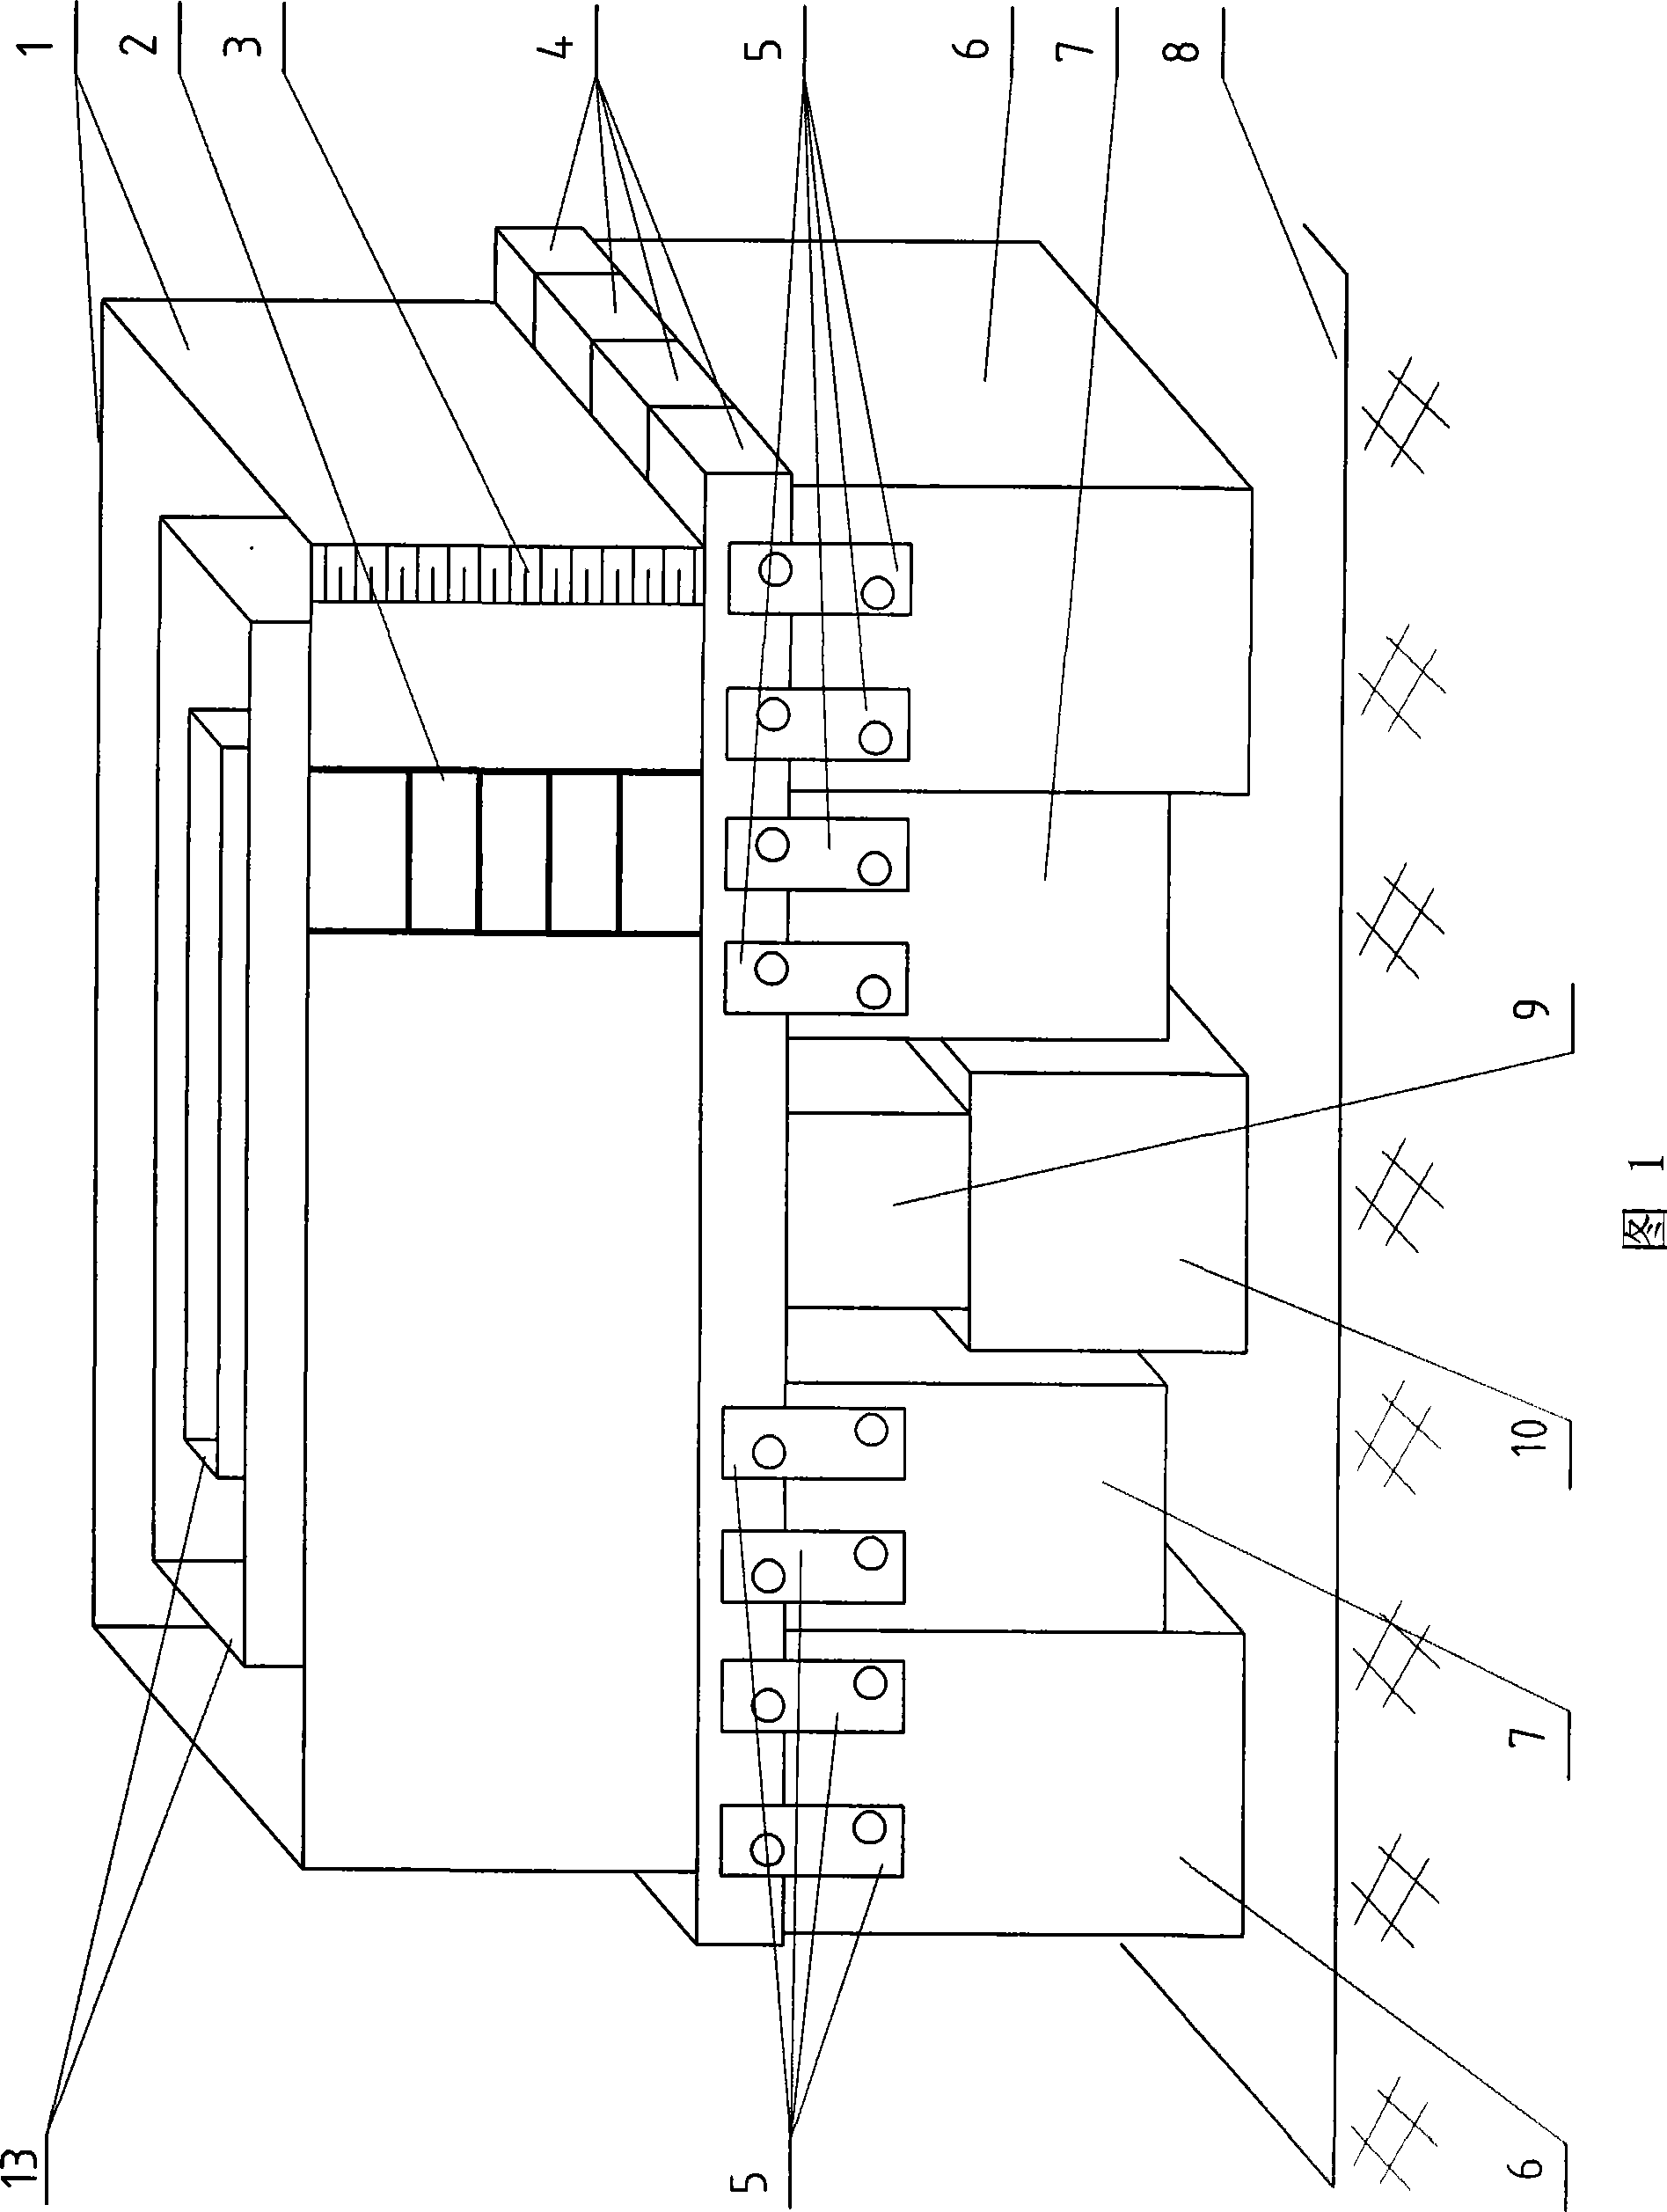 Upper-stacking and lower-hanging combined load static load test pile apparatus